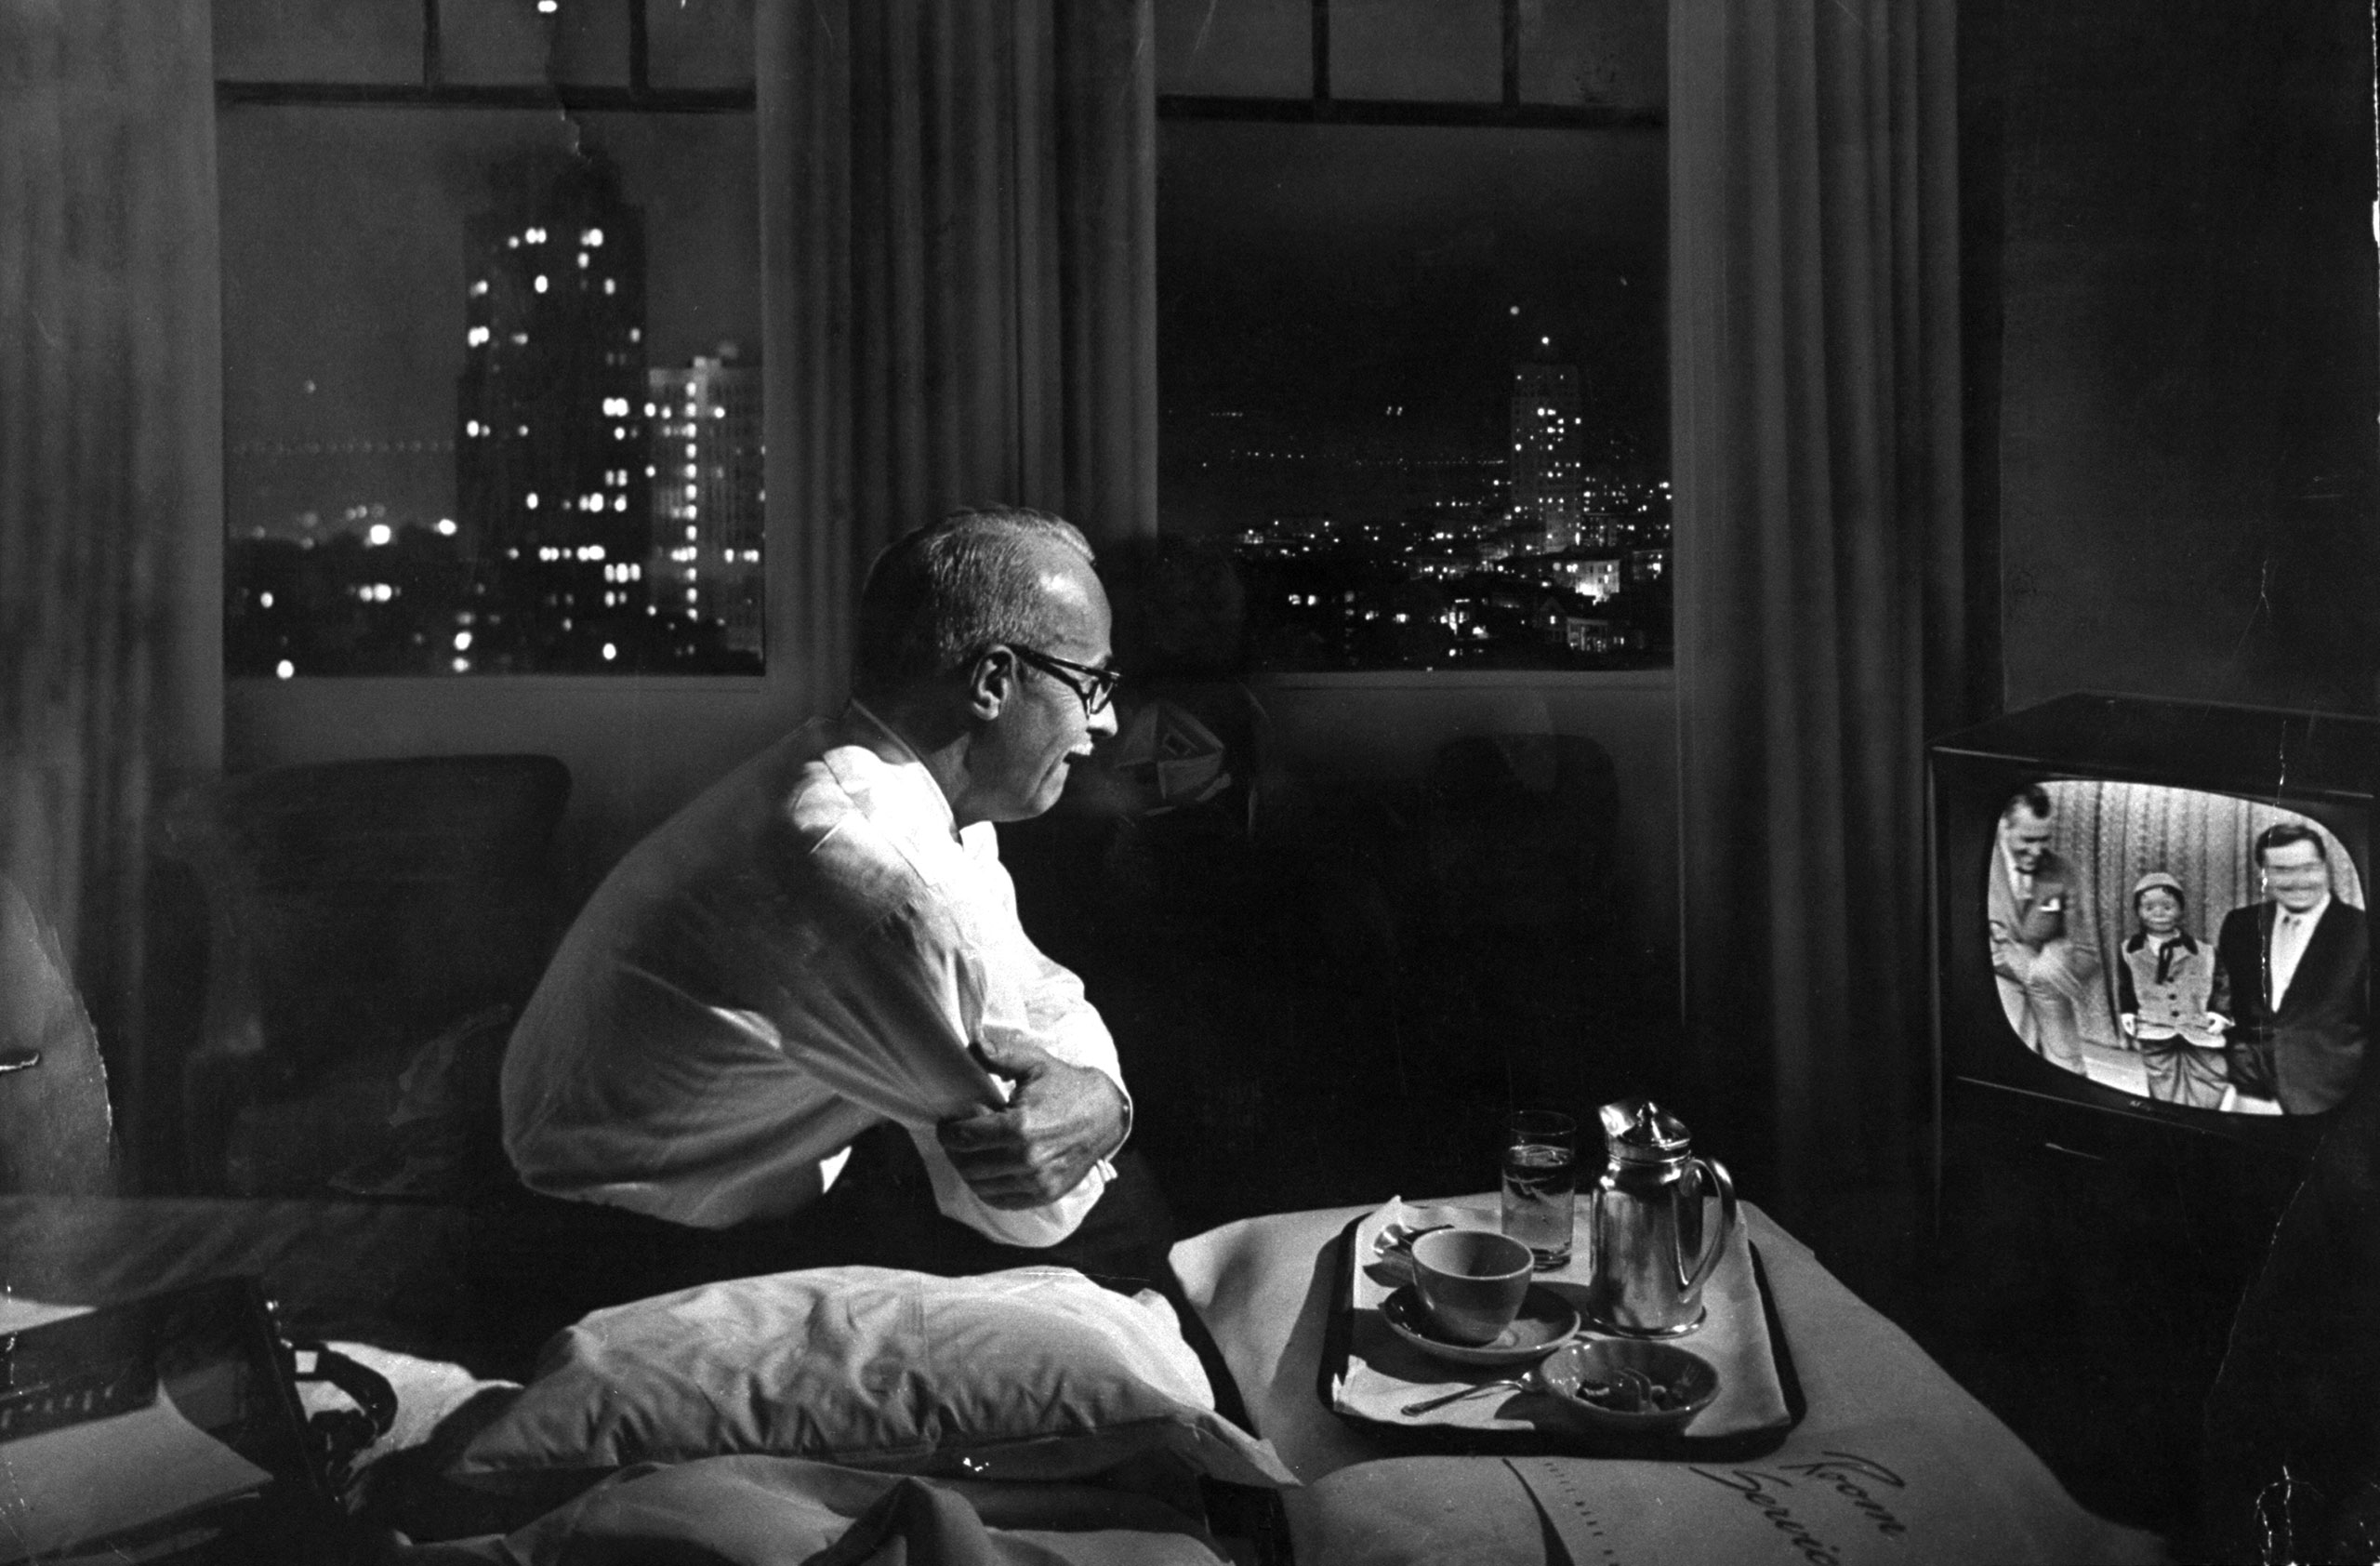 A traveling businessman watches TV in a hotel room in 1958.